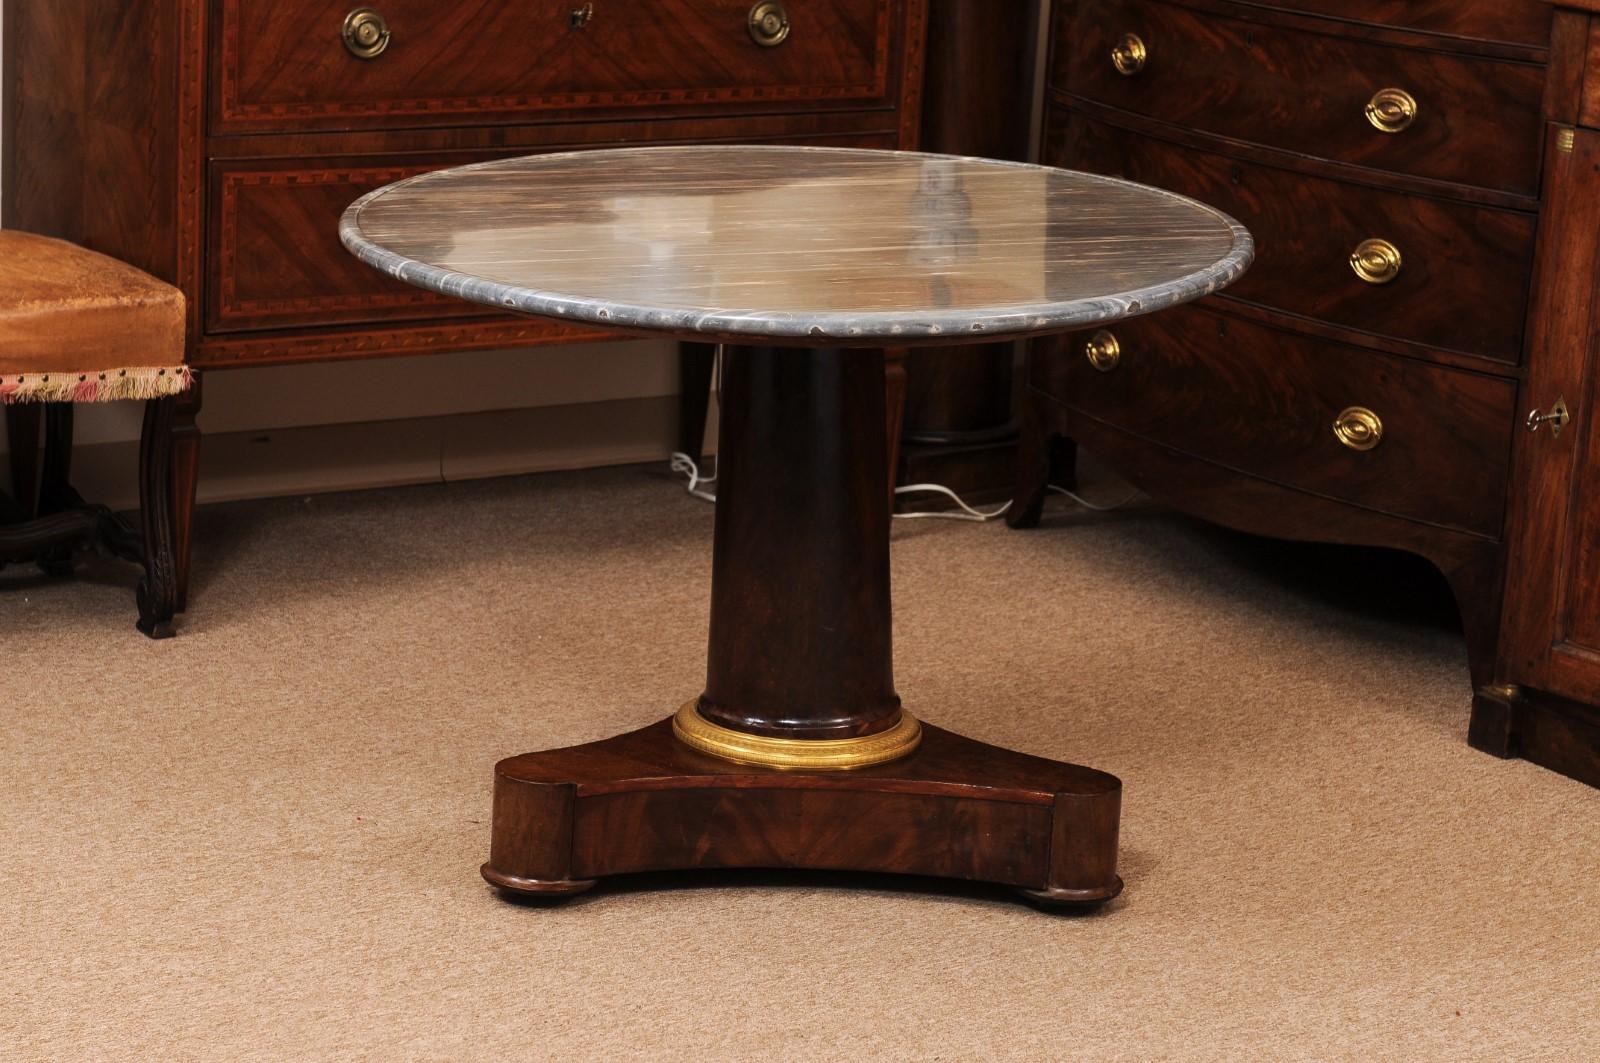  Early 19th C French Empire Walnut Center Table, Grey Marble Top & Ormolu Detail For Sale 4